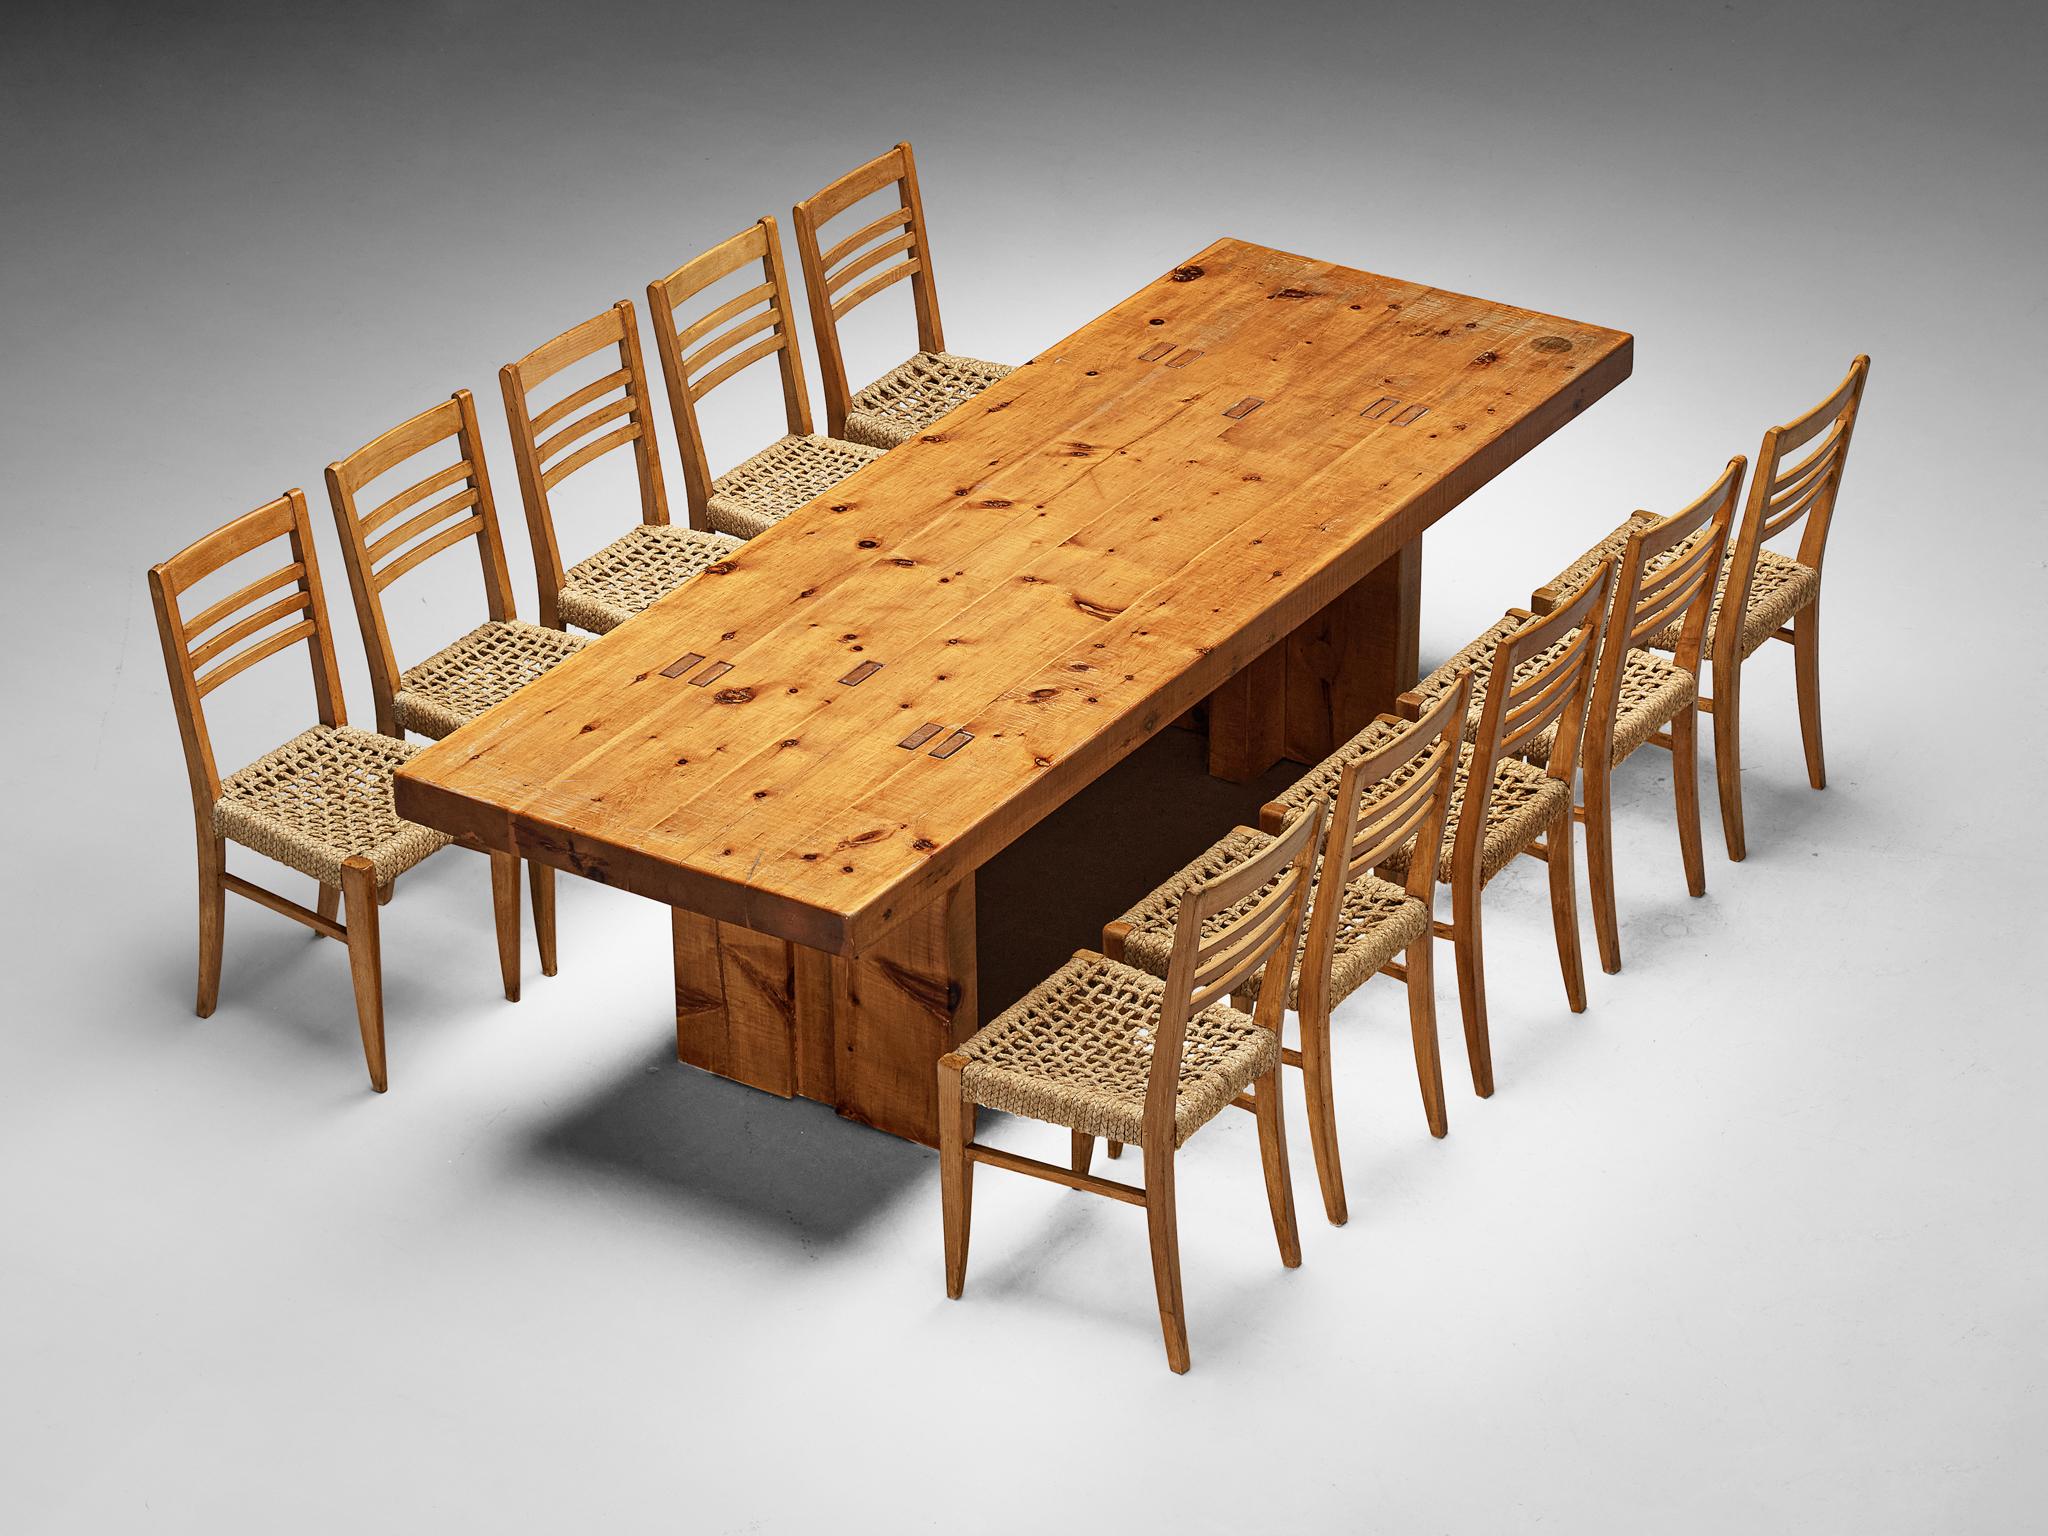 Adrien Audoux and Frida Minet for Vibo, set of ten dining chairs, beech, rope hemp, France, late 1940s 

Set of ten naturalistic dining chairs designed by Adrien Audoux and Frida Minet. The seats are made of woven hemp from the abaca plant which is